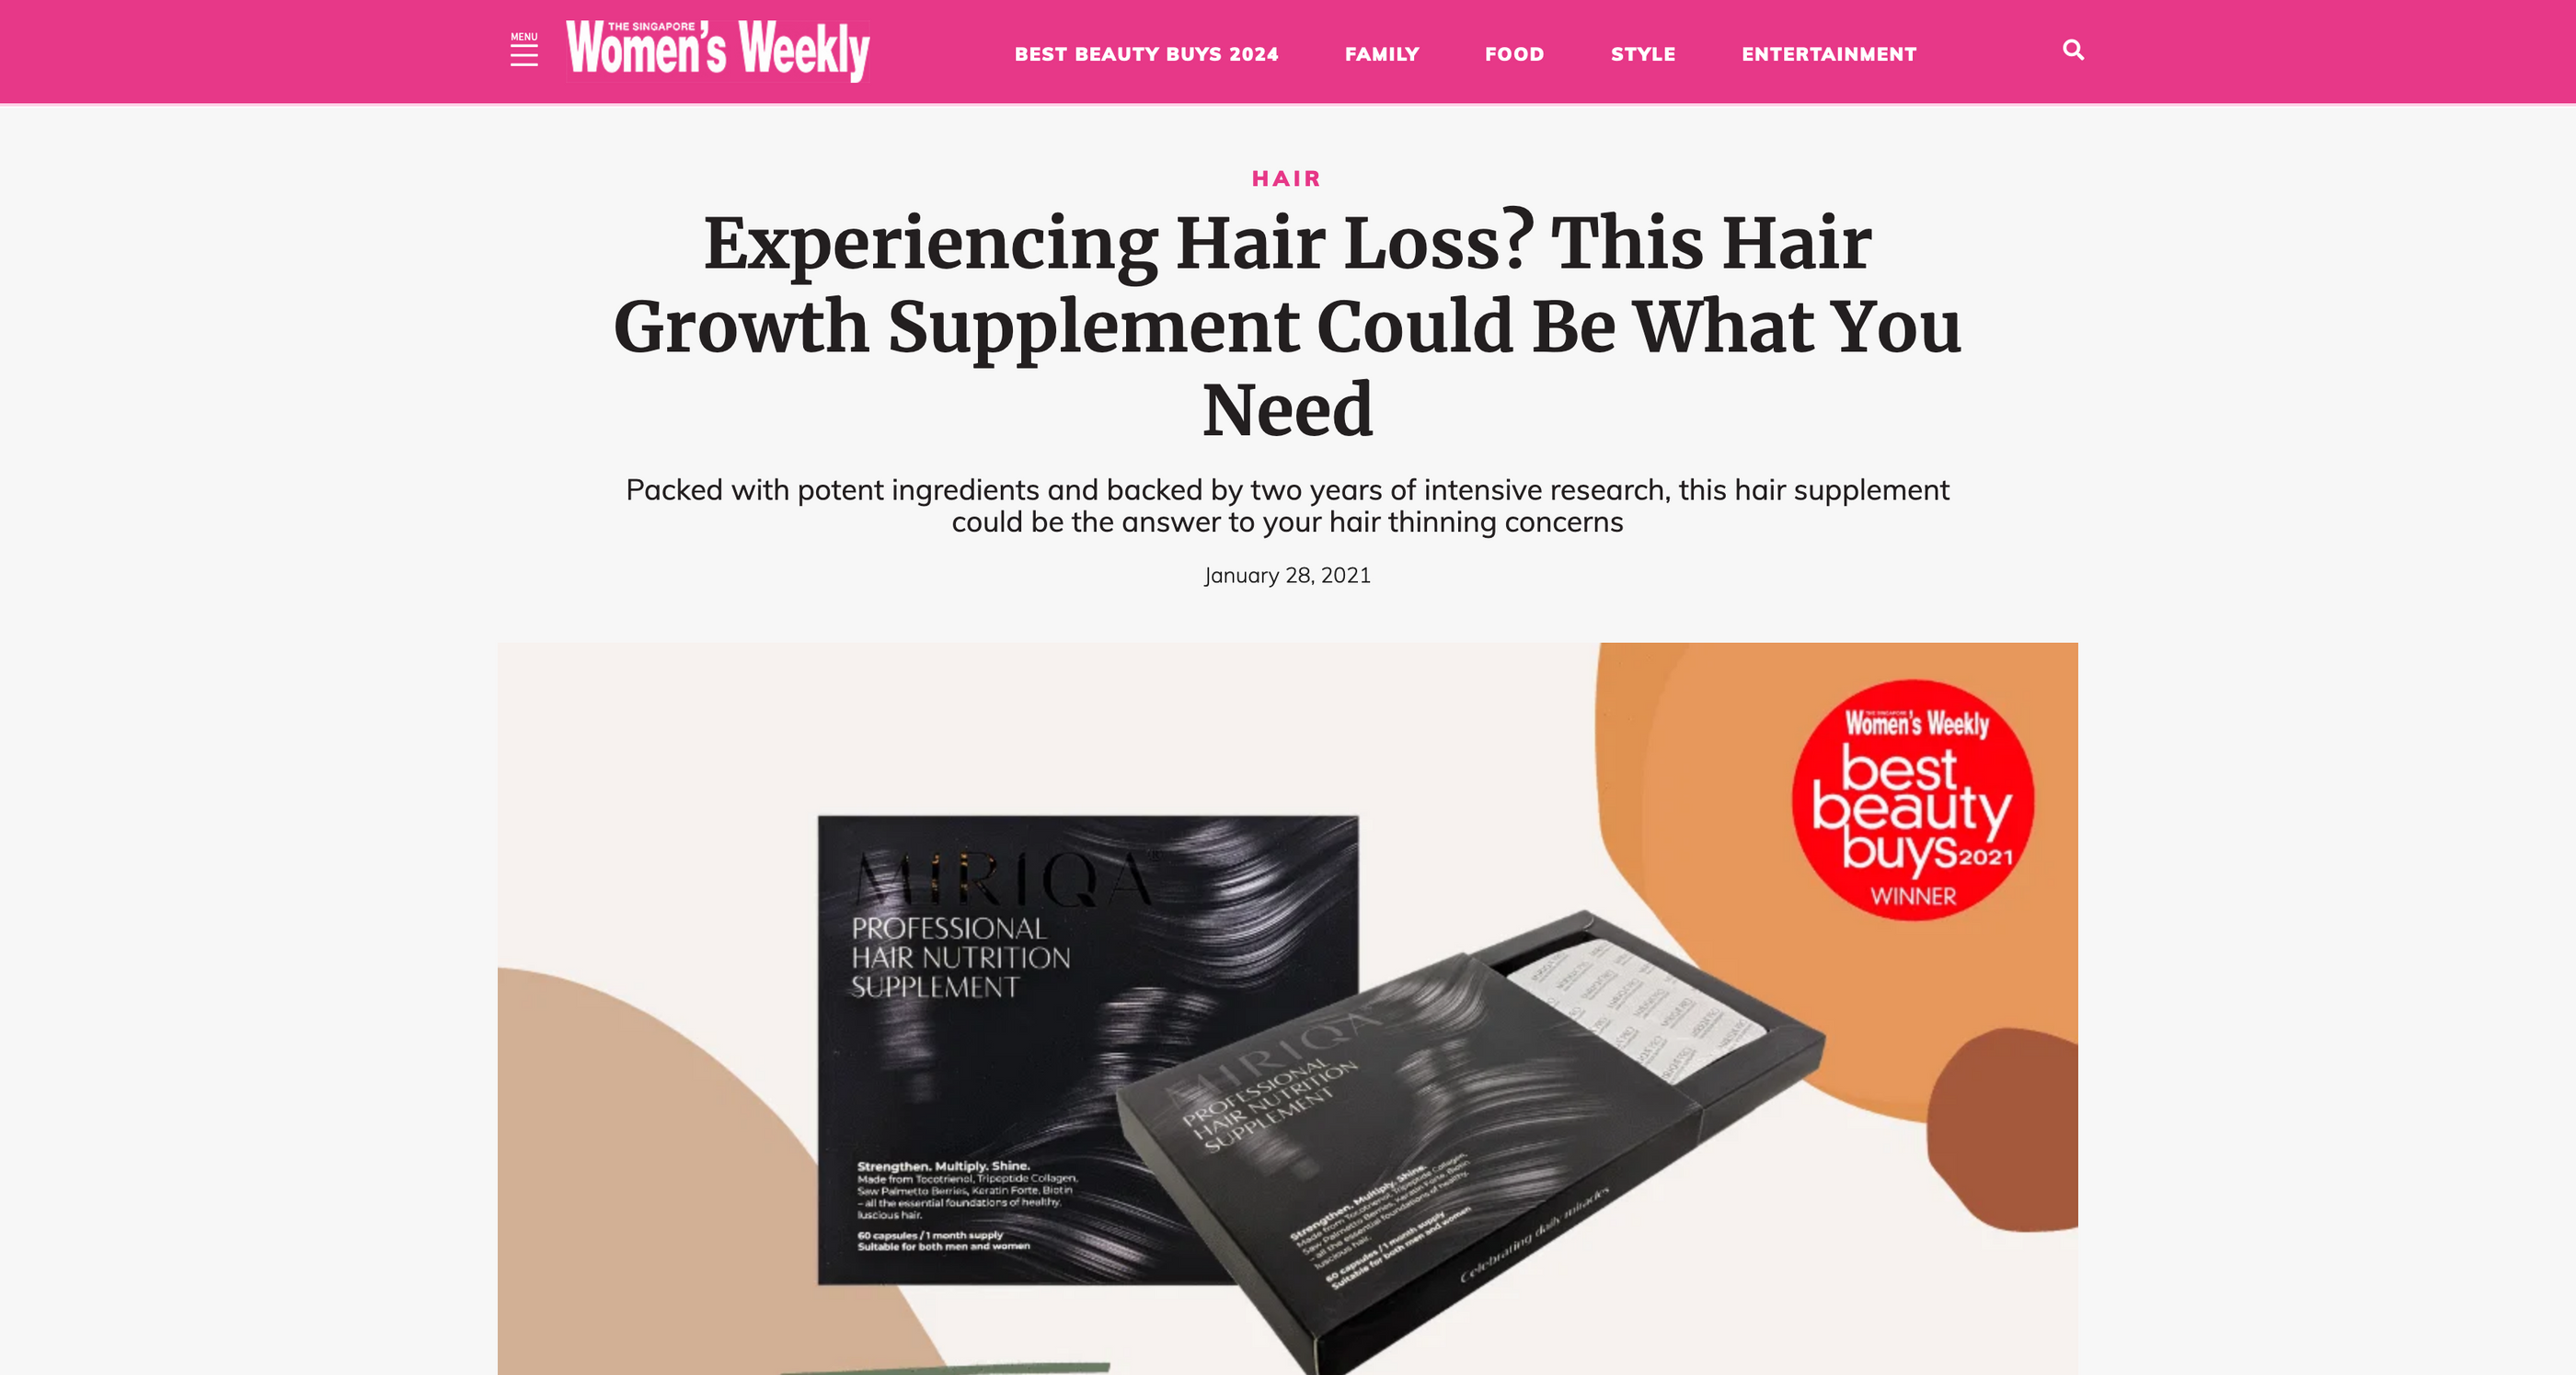 Experiencing Hair Loss? This Hair Growth Supplement Could Be What You Need by The Singapore Women’s Weekly